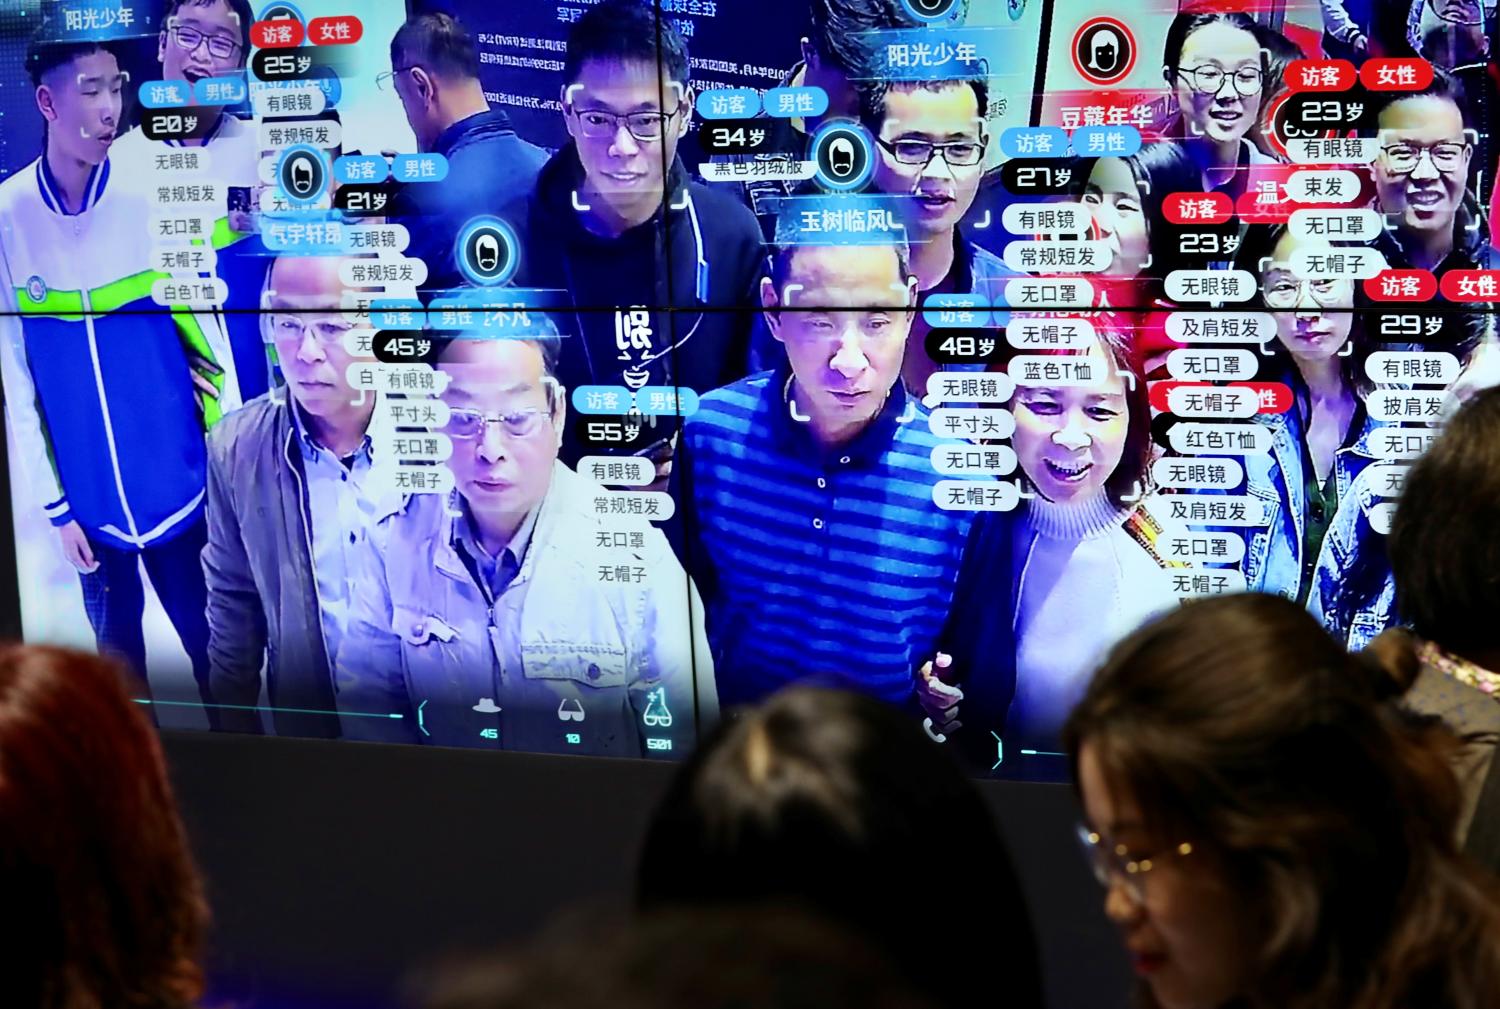 Visitors are seen at a screen displaying facial recognition technology at the Digital China Exhibition in Fuzhou, Fujian province, China May 8, 2019. China Daily via REUTERS  ATTENTION EDITORS - THIS IMAGE WAS PROVIDED BY A THIRD PARTY. CHINA OUT. NO COMMERCIAL OR EDITORIAL SALES IN CHINA. - RC155F050BE0